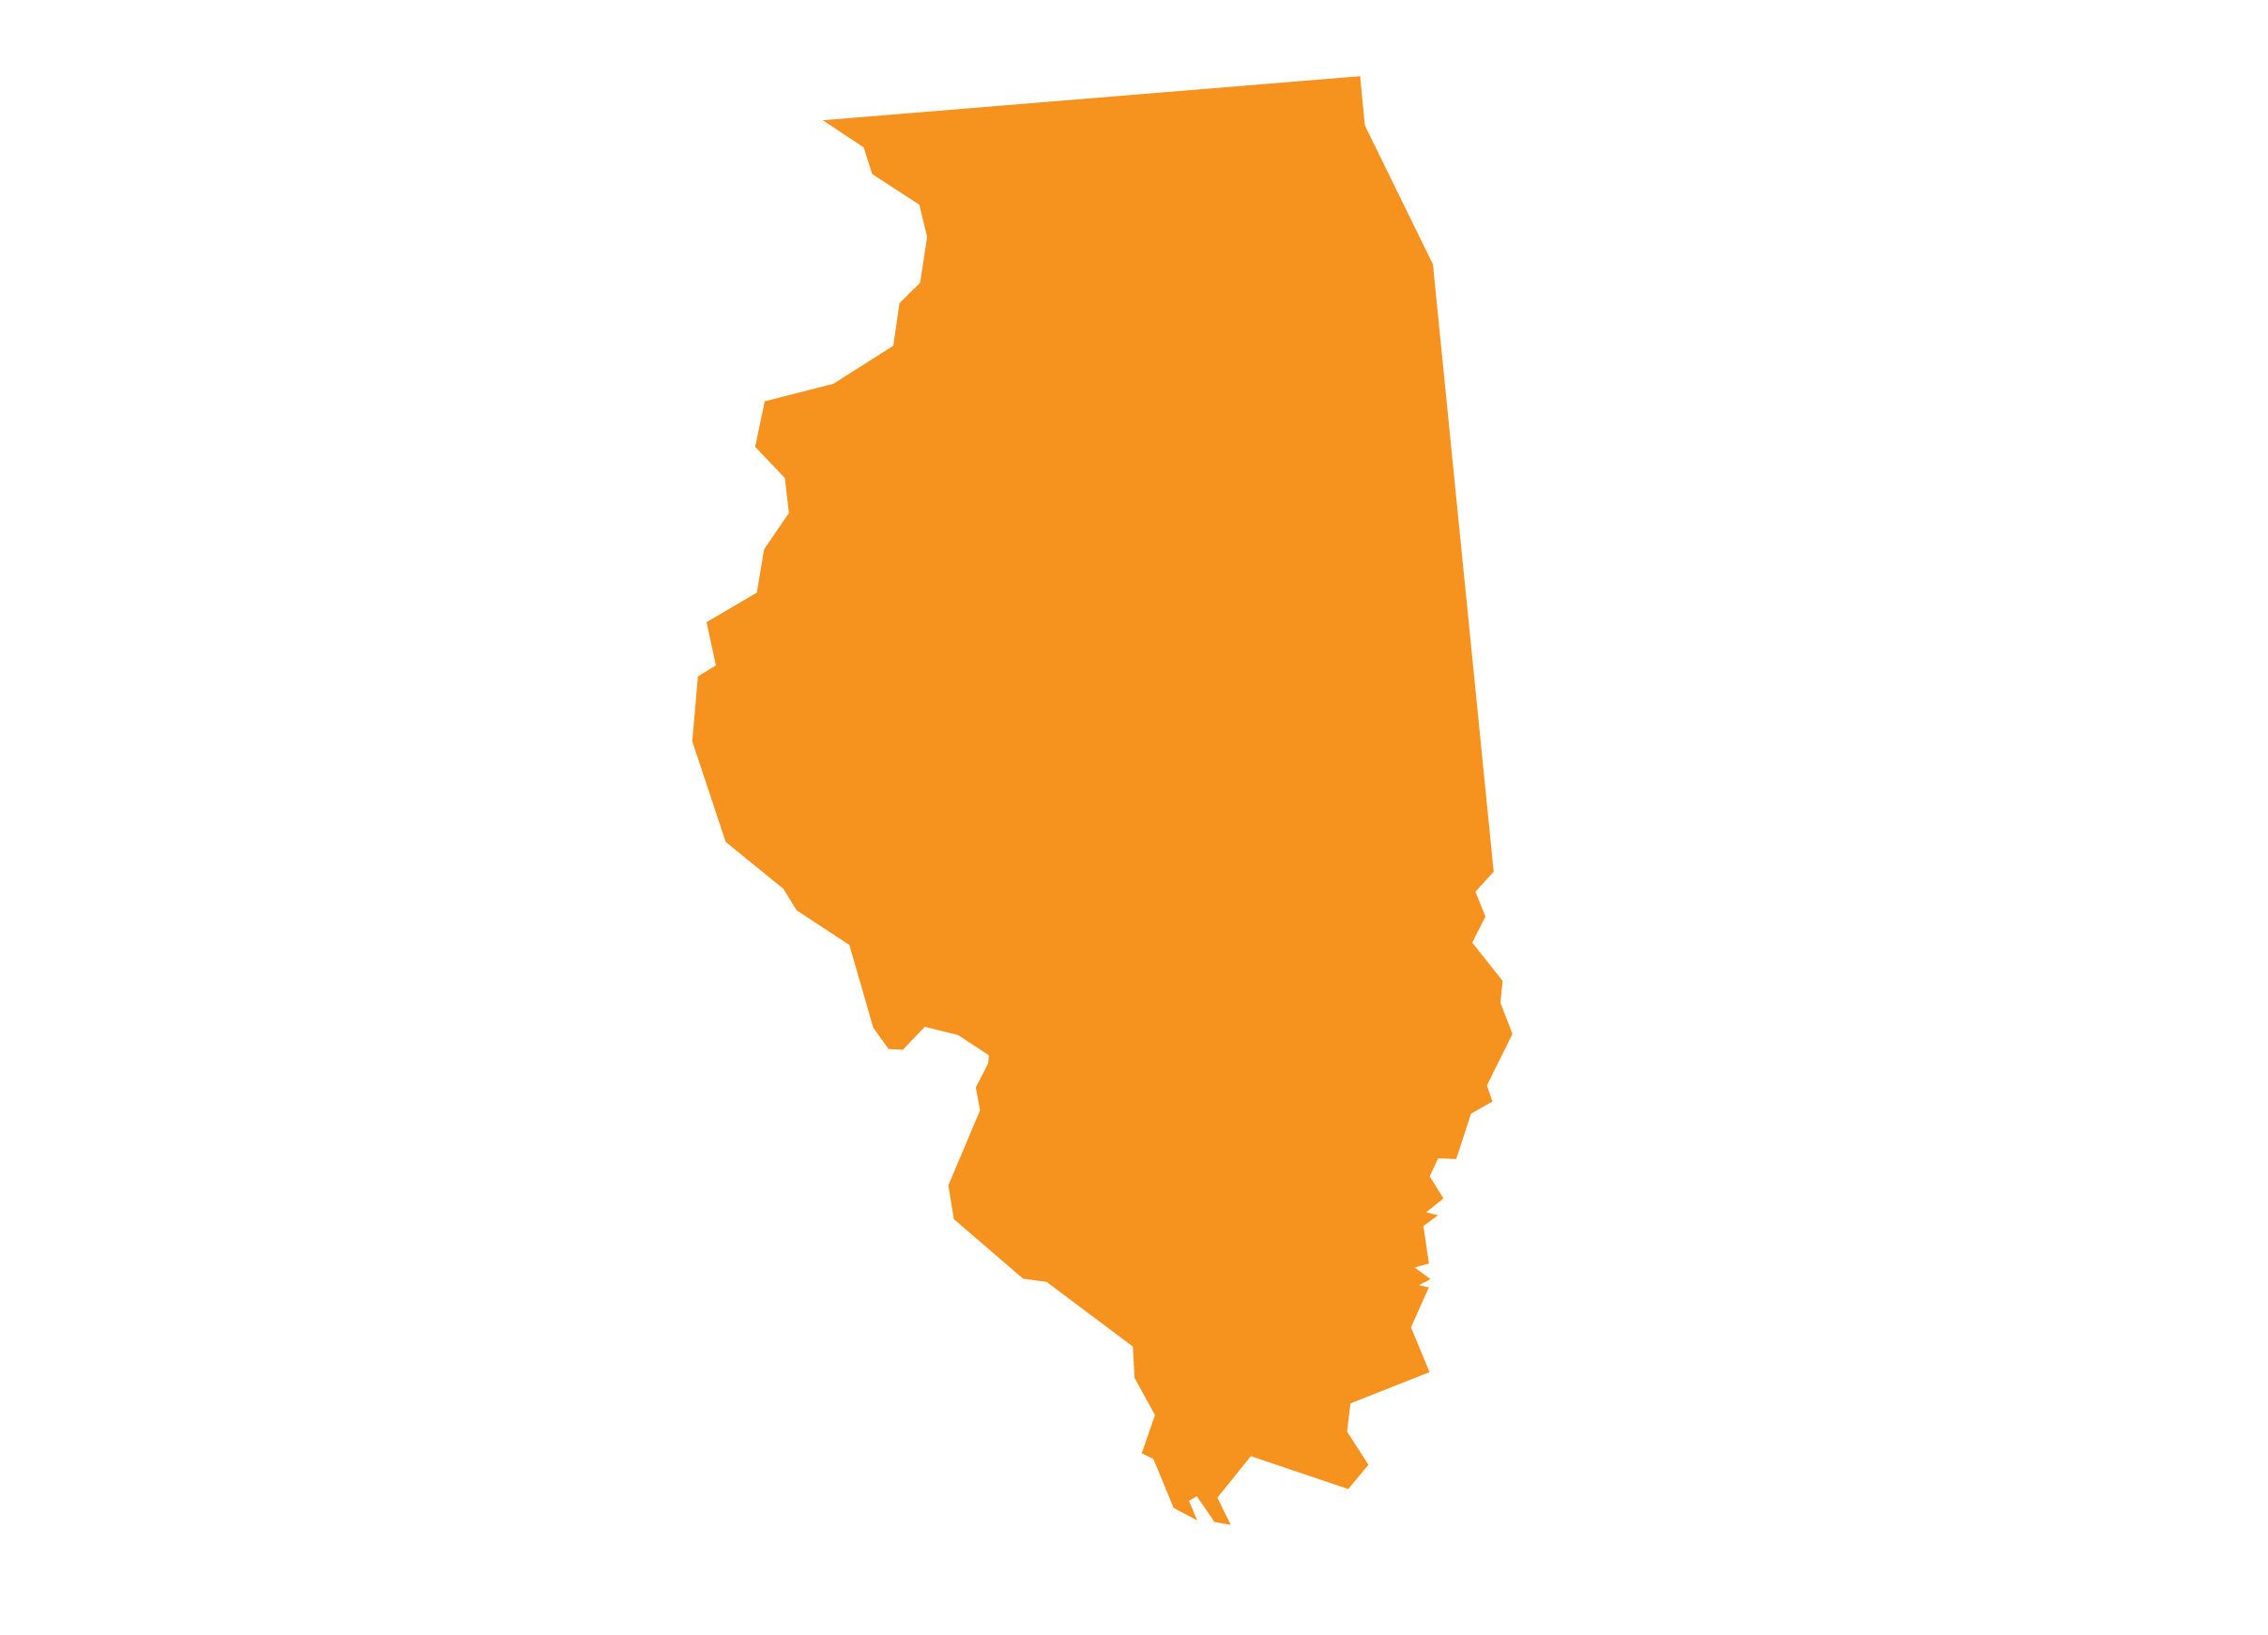 The shape of the state of Illinois